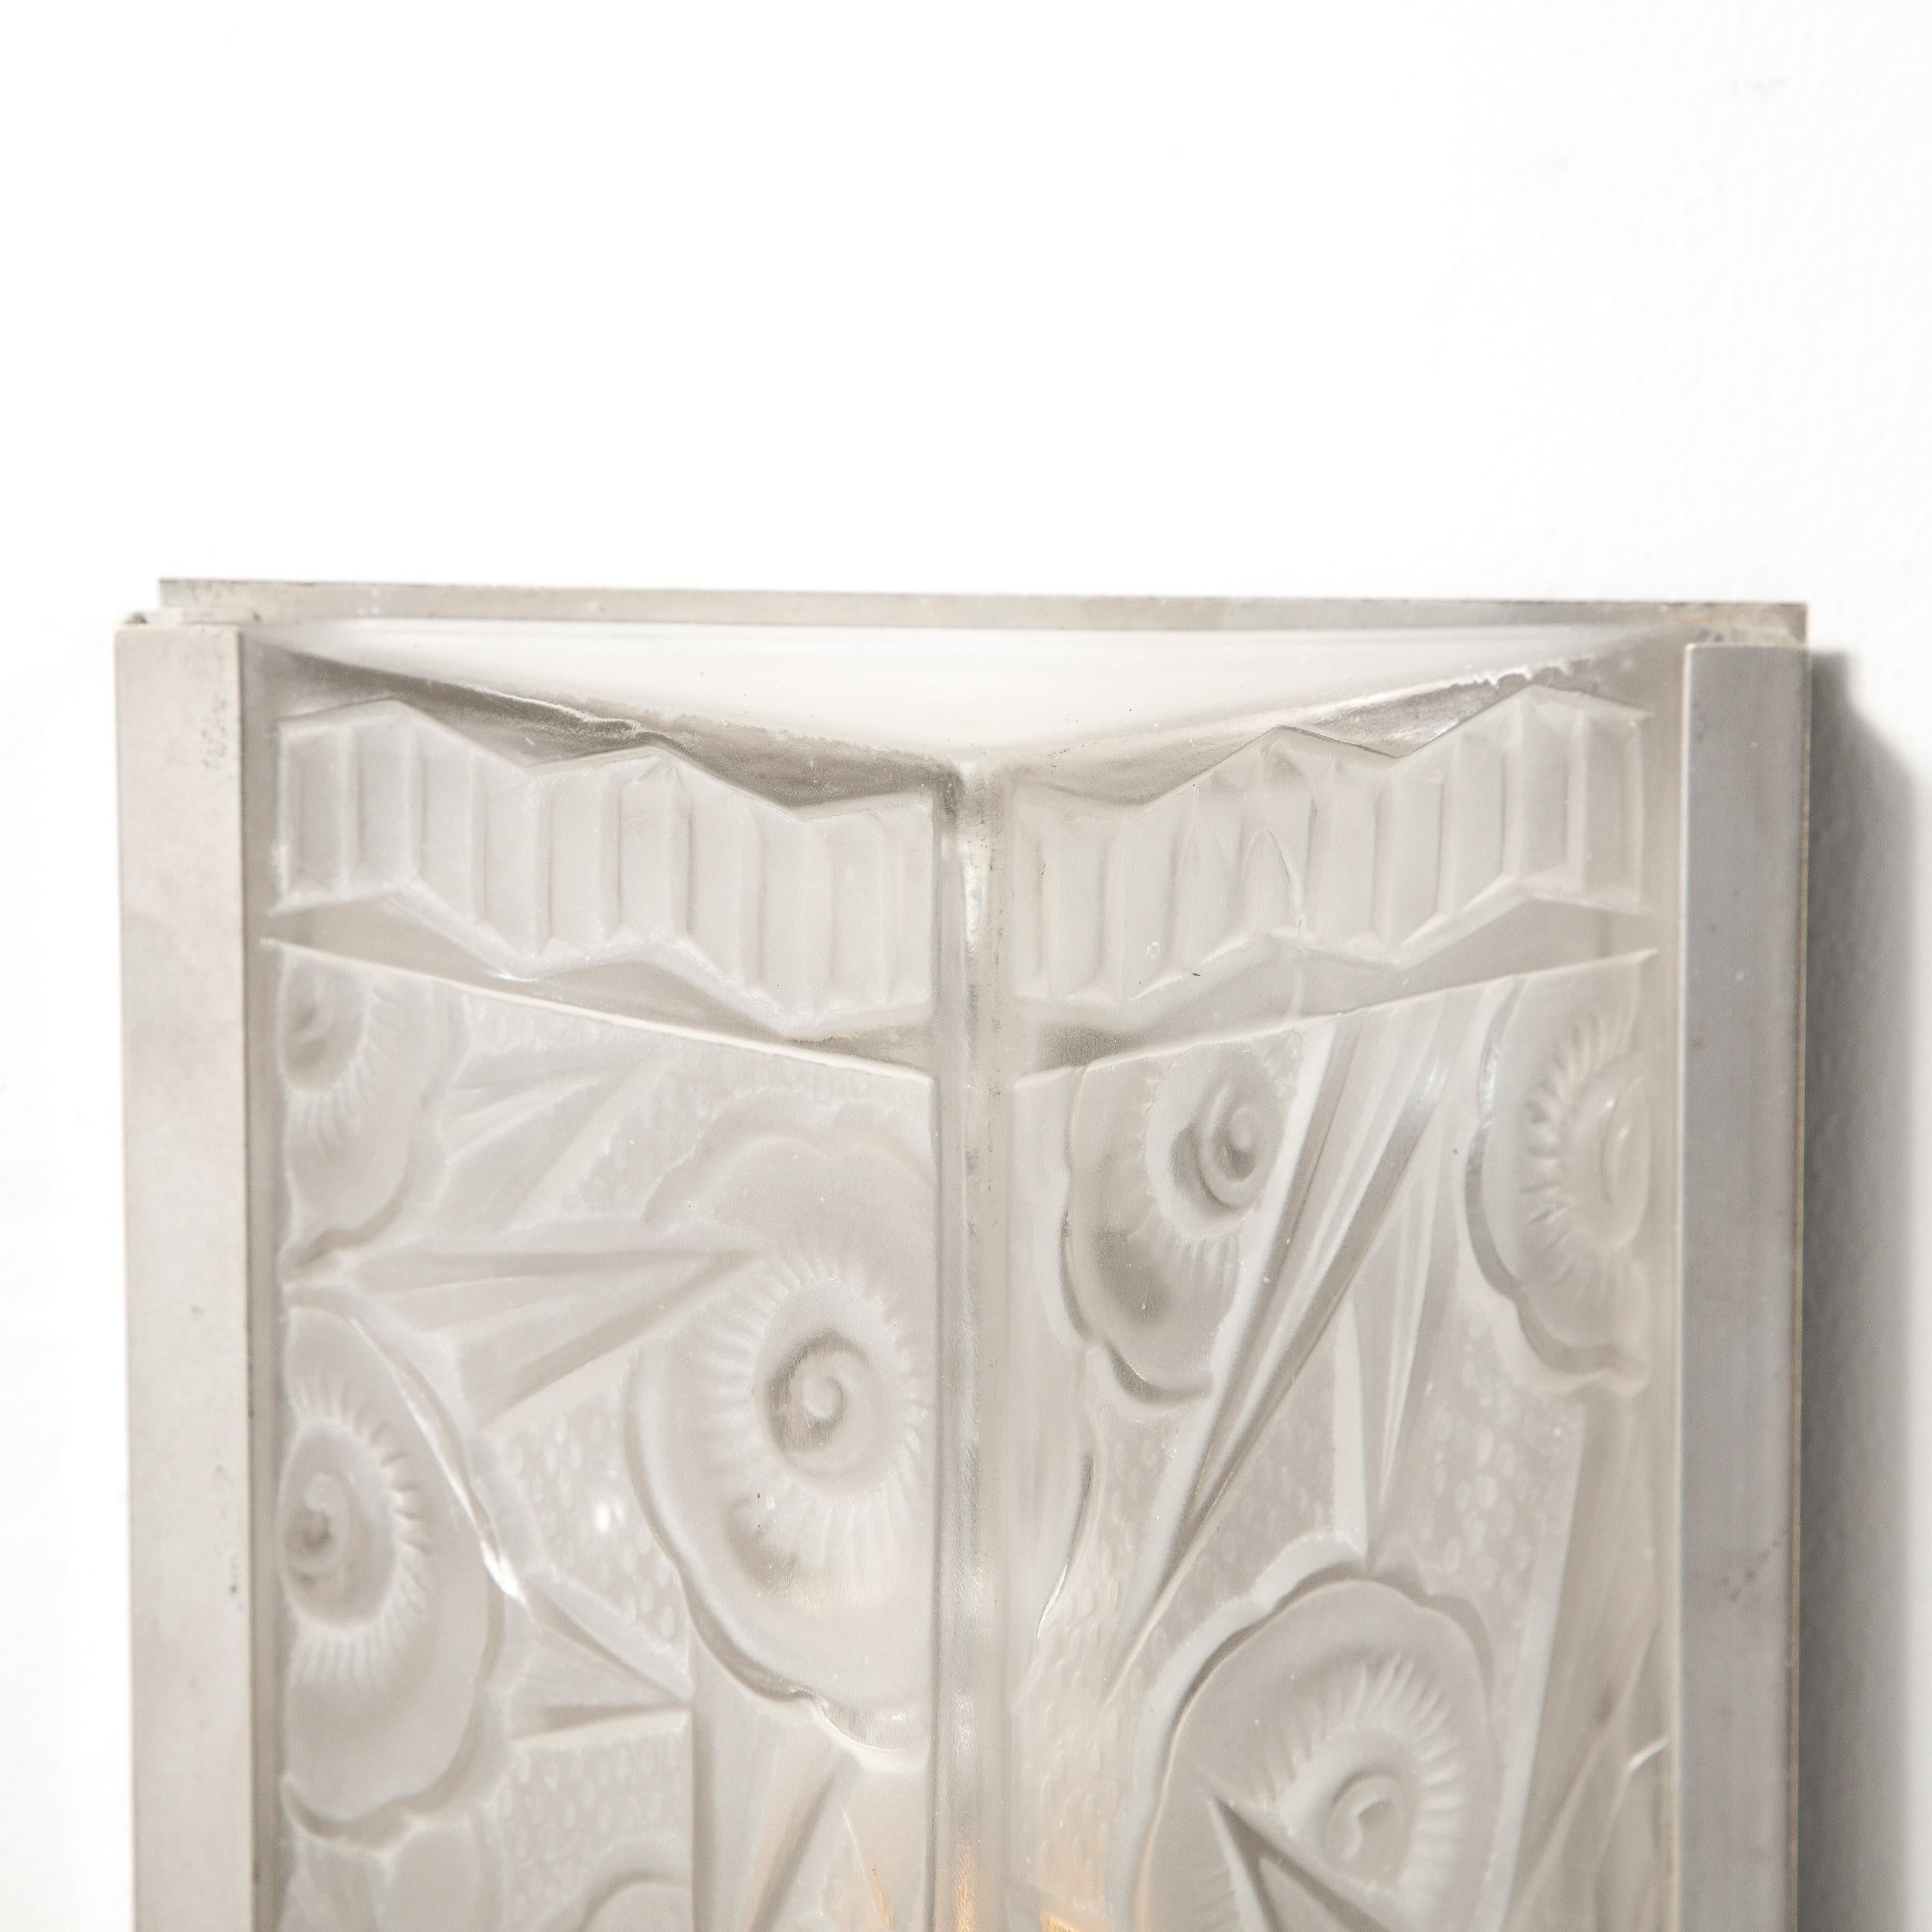 Pair of Art Deco Molded & Frosted Glass Sconces w/ Stylized Cubist Floral Motifs 10